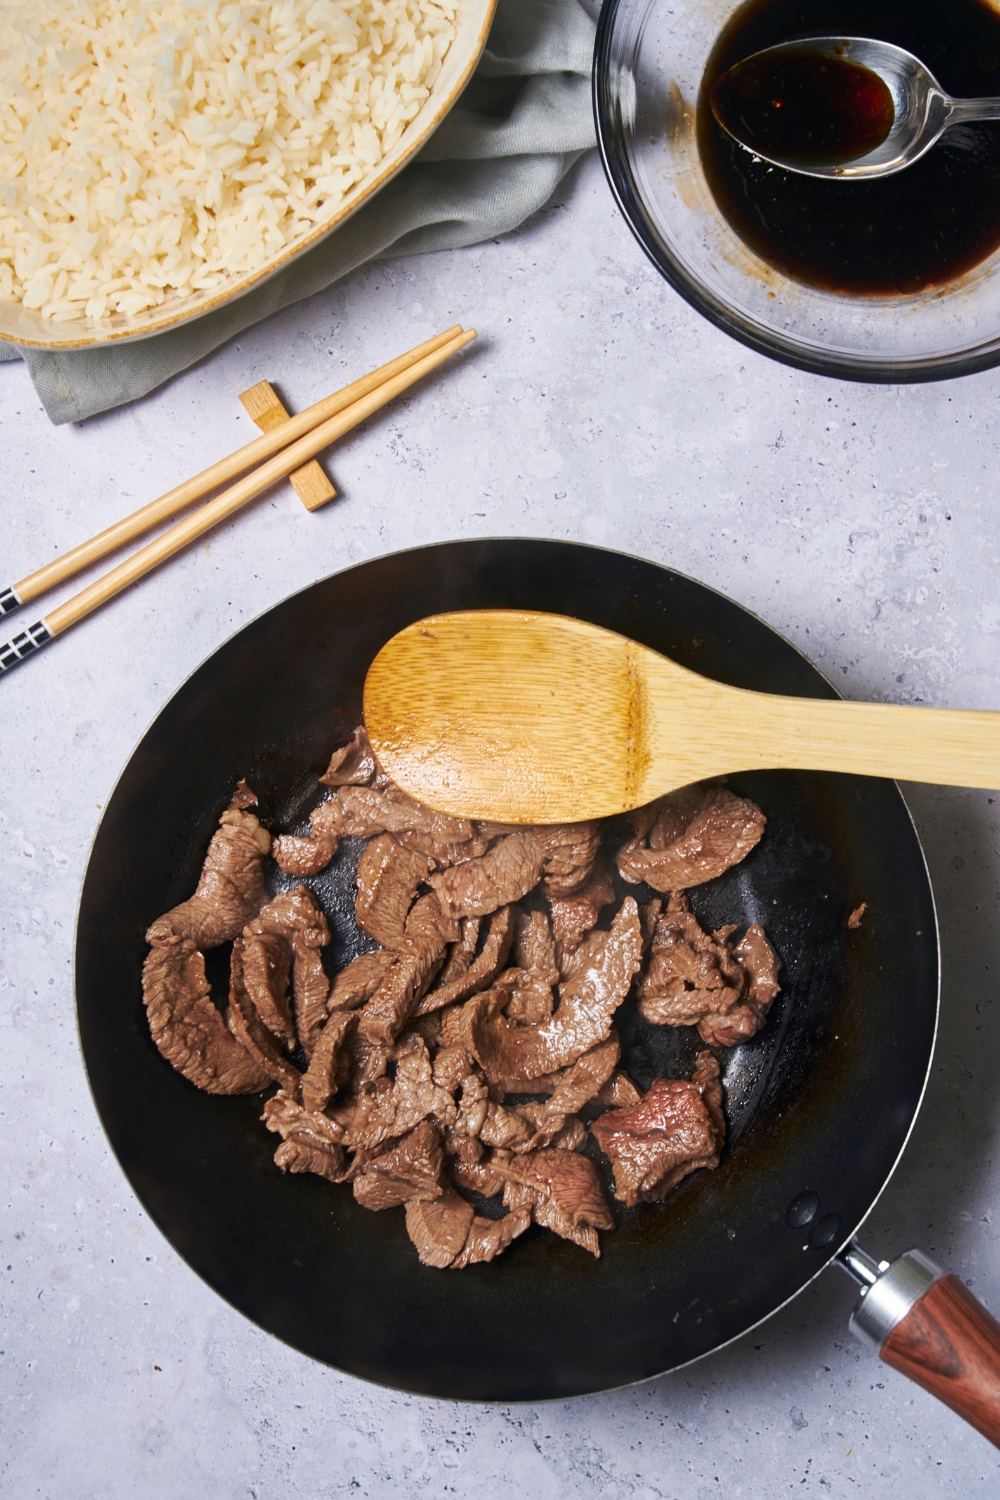 A black skillet filled with cooked beef and a wooden spoon in the skillet.